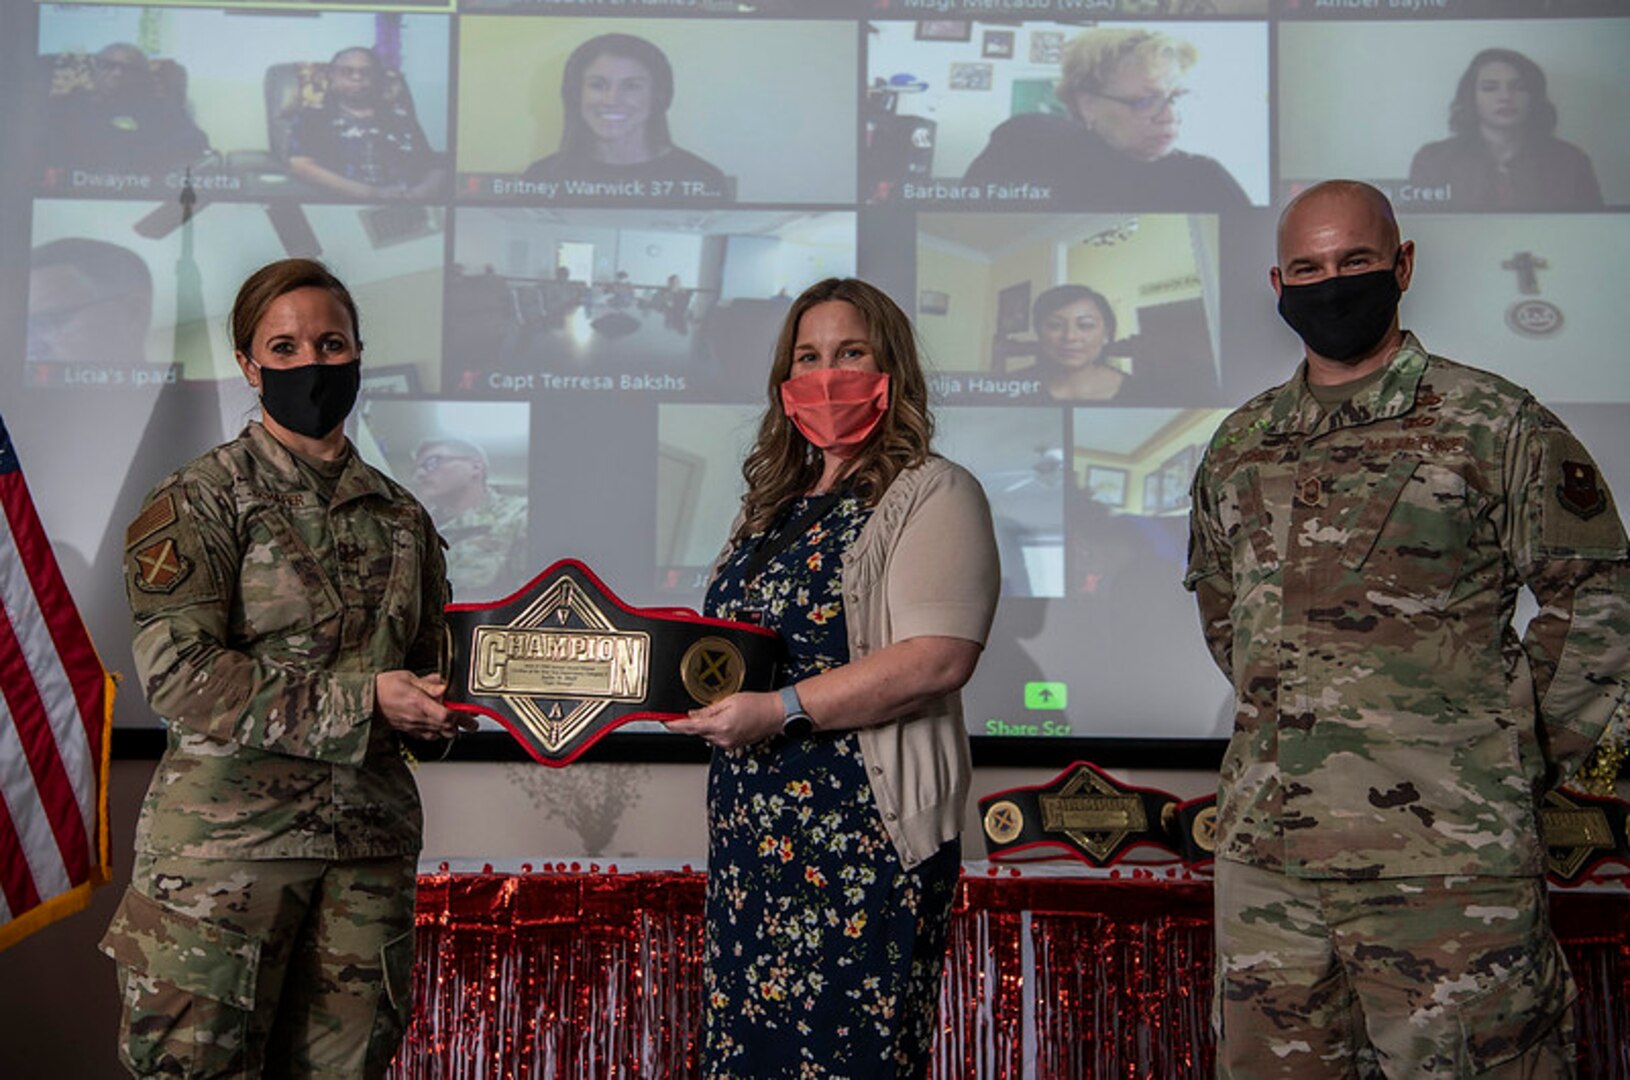 The 37th TRW annual awards ceremony was held at the IAAFA auditorium, Joint Base San Antonio-Lackland, Texas, March 5, 2021.